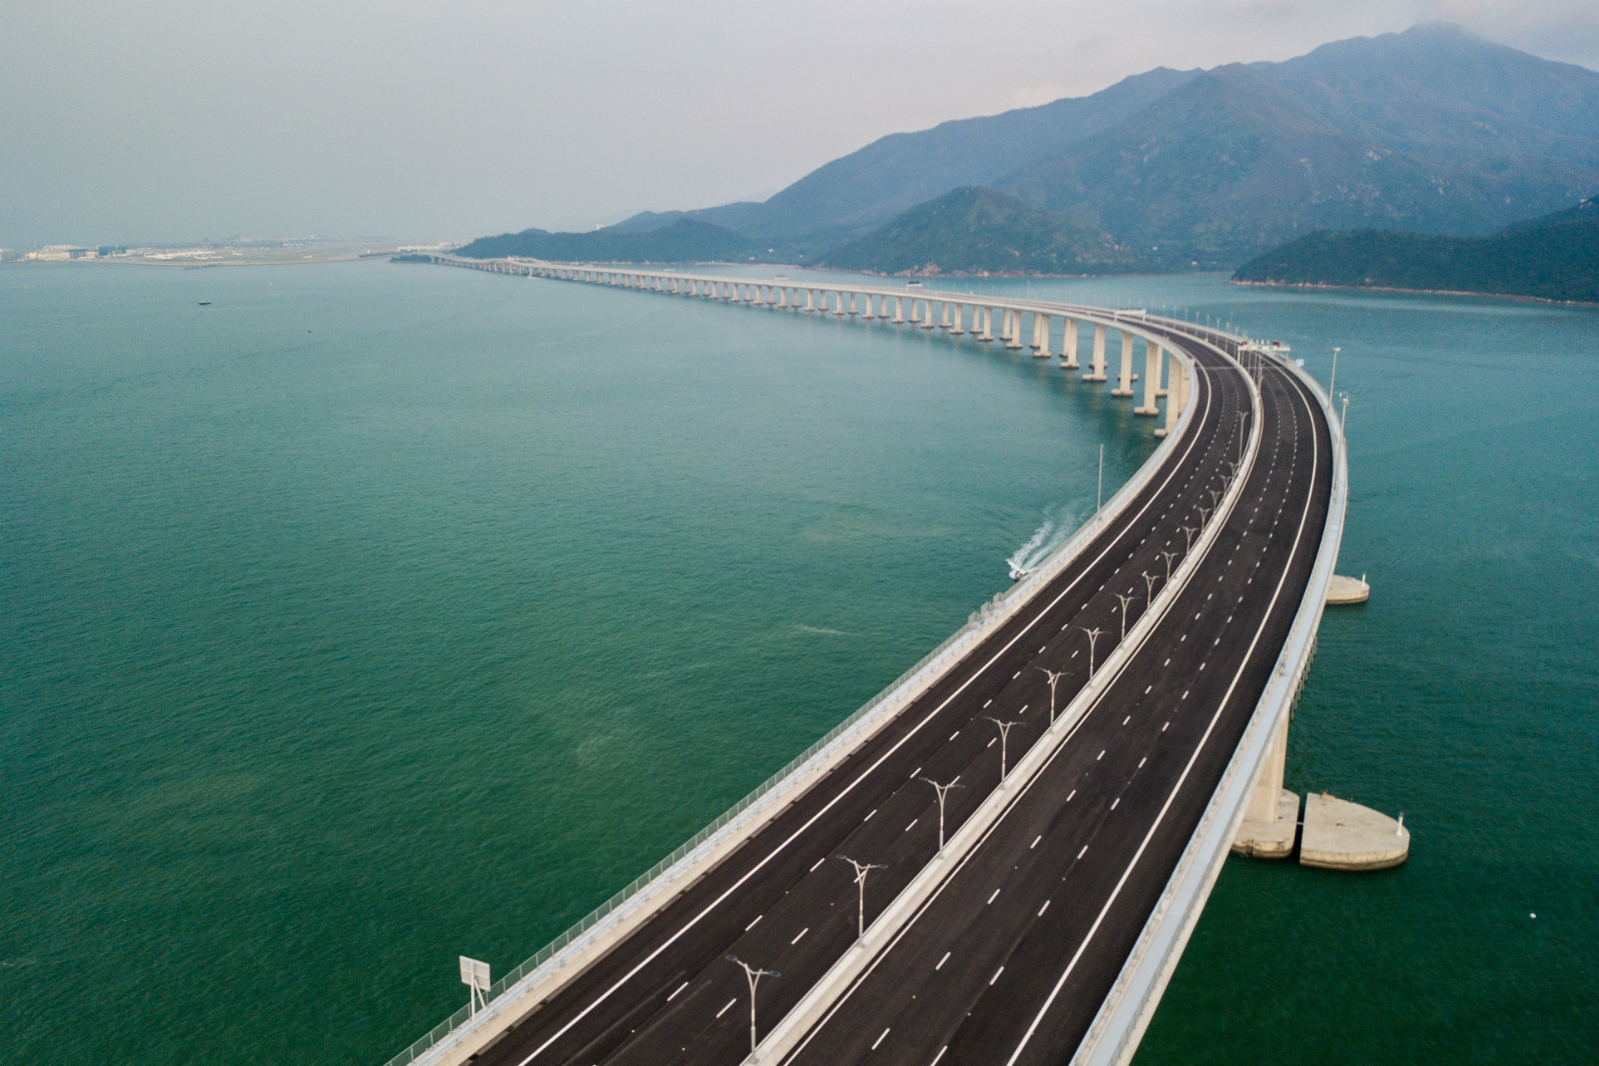 An aerial view taken on October 22, 2018, shows a section of the Hong Kong-Zhuhai-Macau Bridge (HKZM) in Hong Kong. The world's longest sea-bridge connecting Hong Kong, Macau and mainland China will be launched October 23, at a time when Beijing seeks to tighten its grip on its territories. [Photo: AFP/Anthony WALLACE]